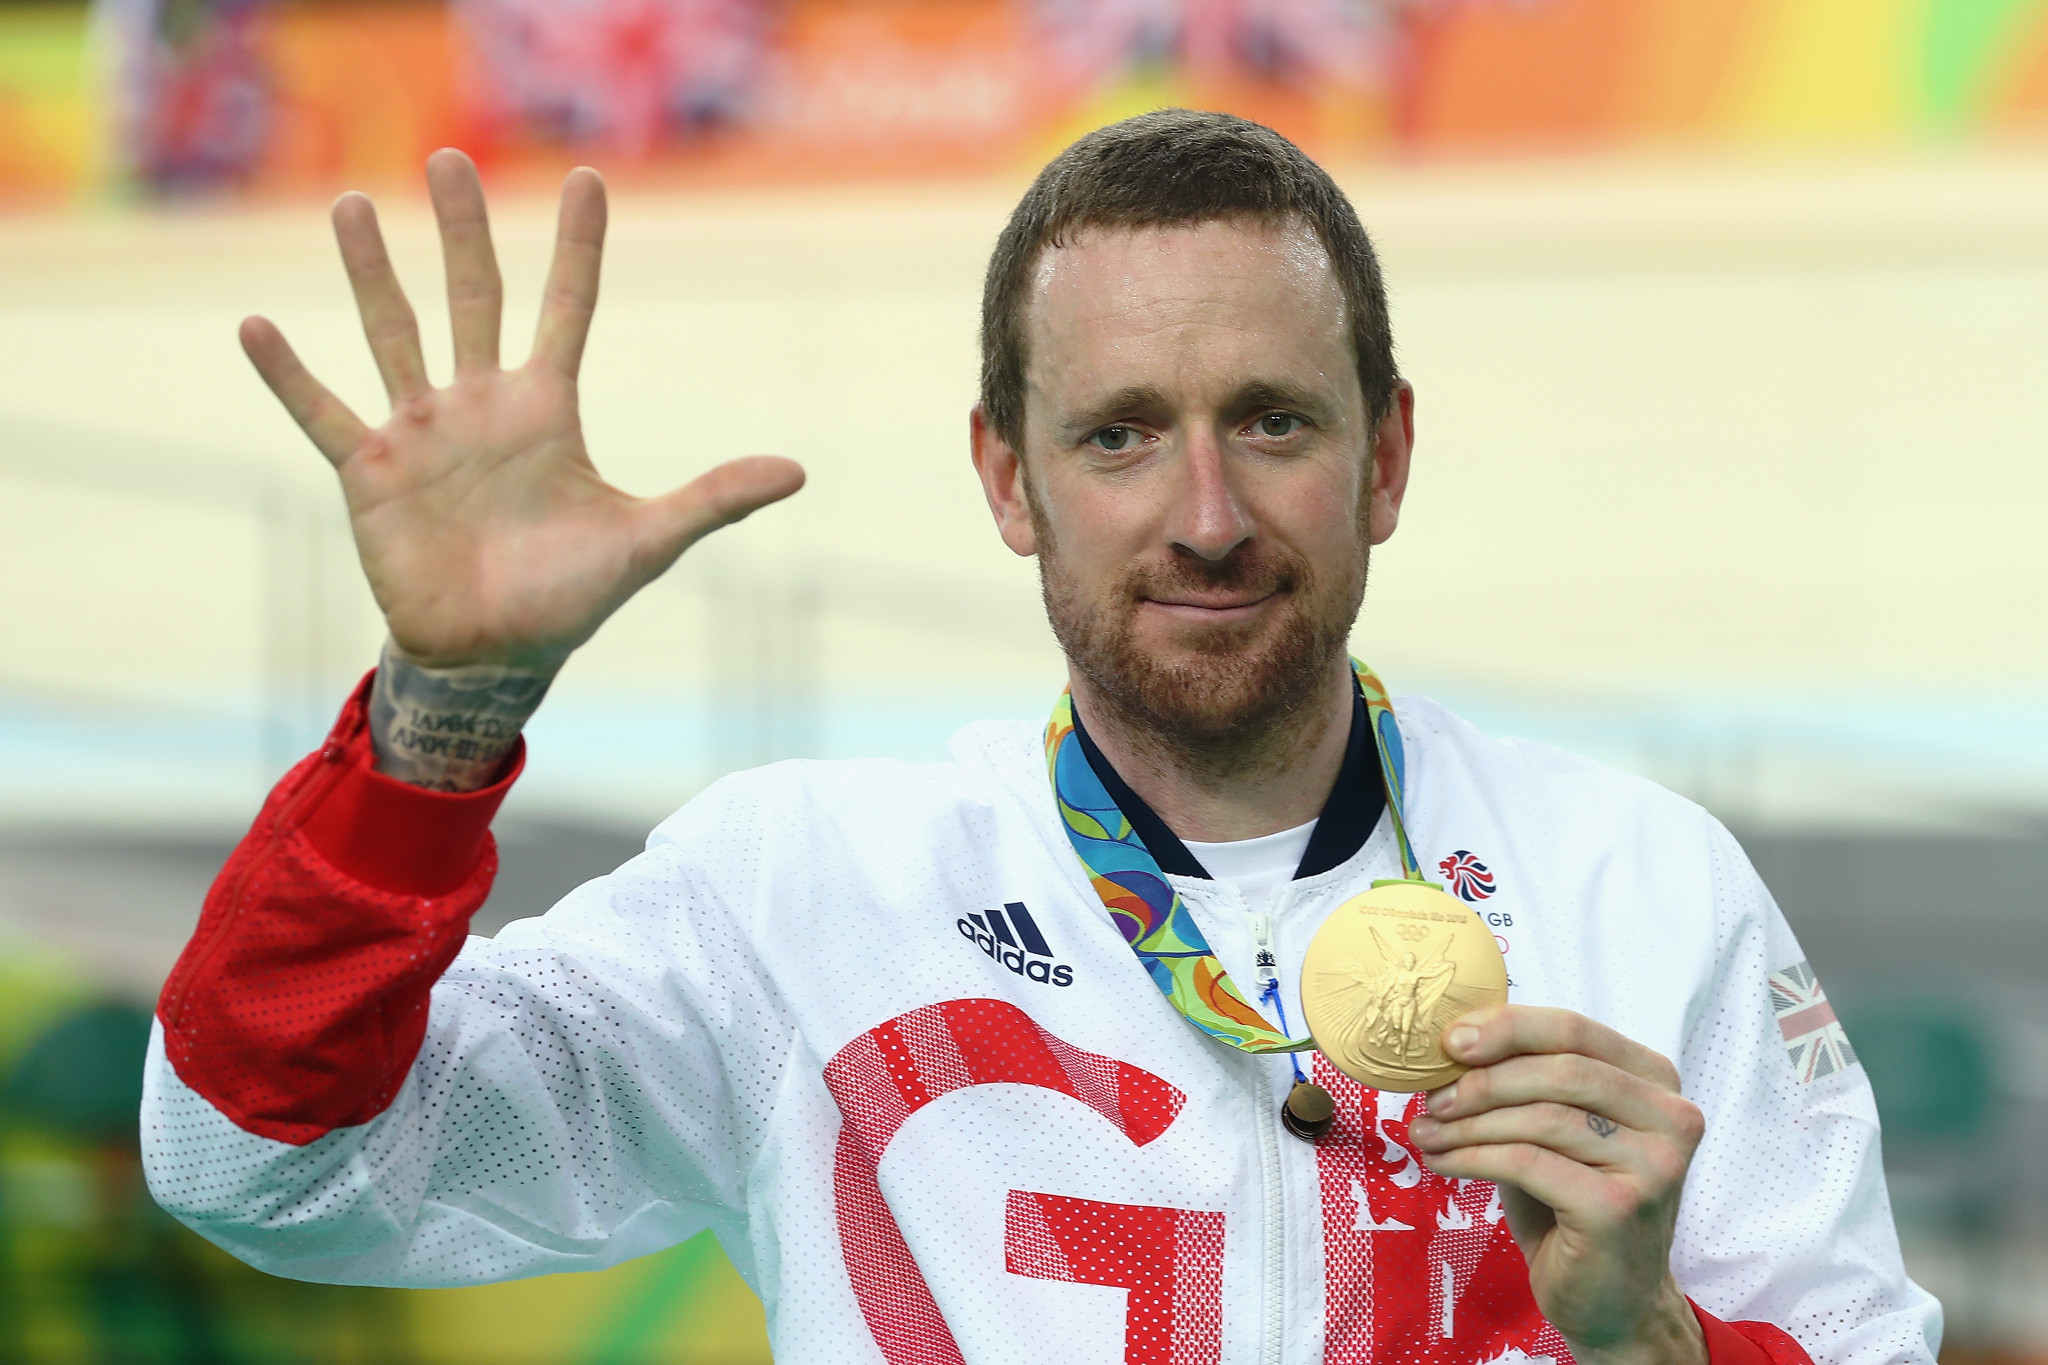 Sir Bradley Wiggins could be forced to sell his Olympic medals after declaring bankruptcy. GETTY IMAGES